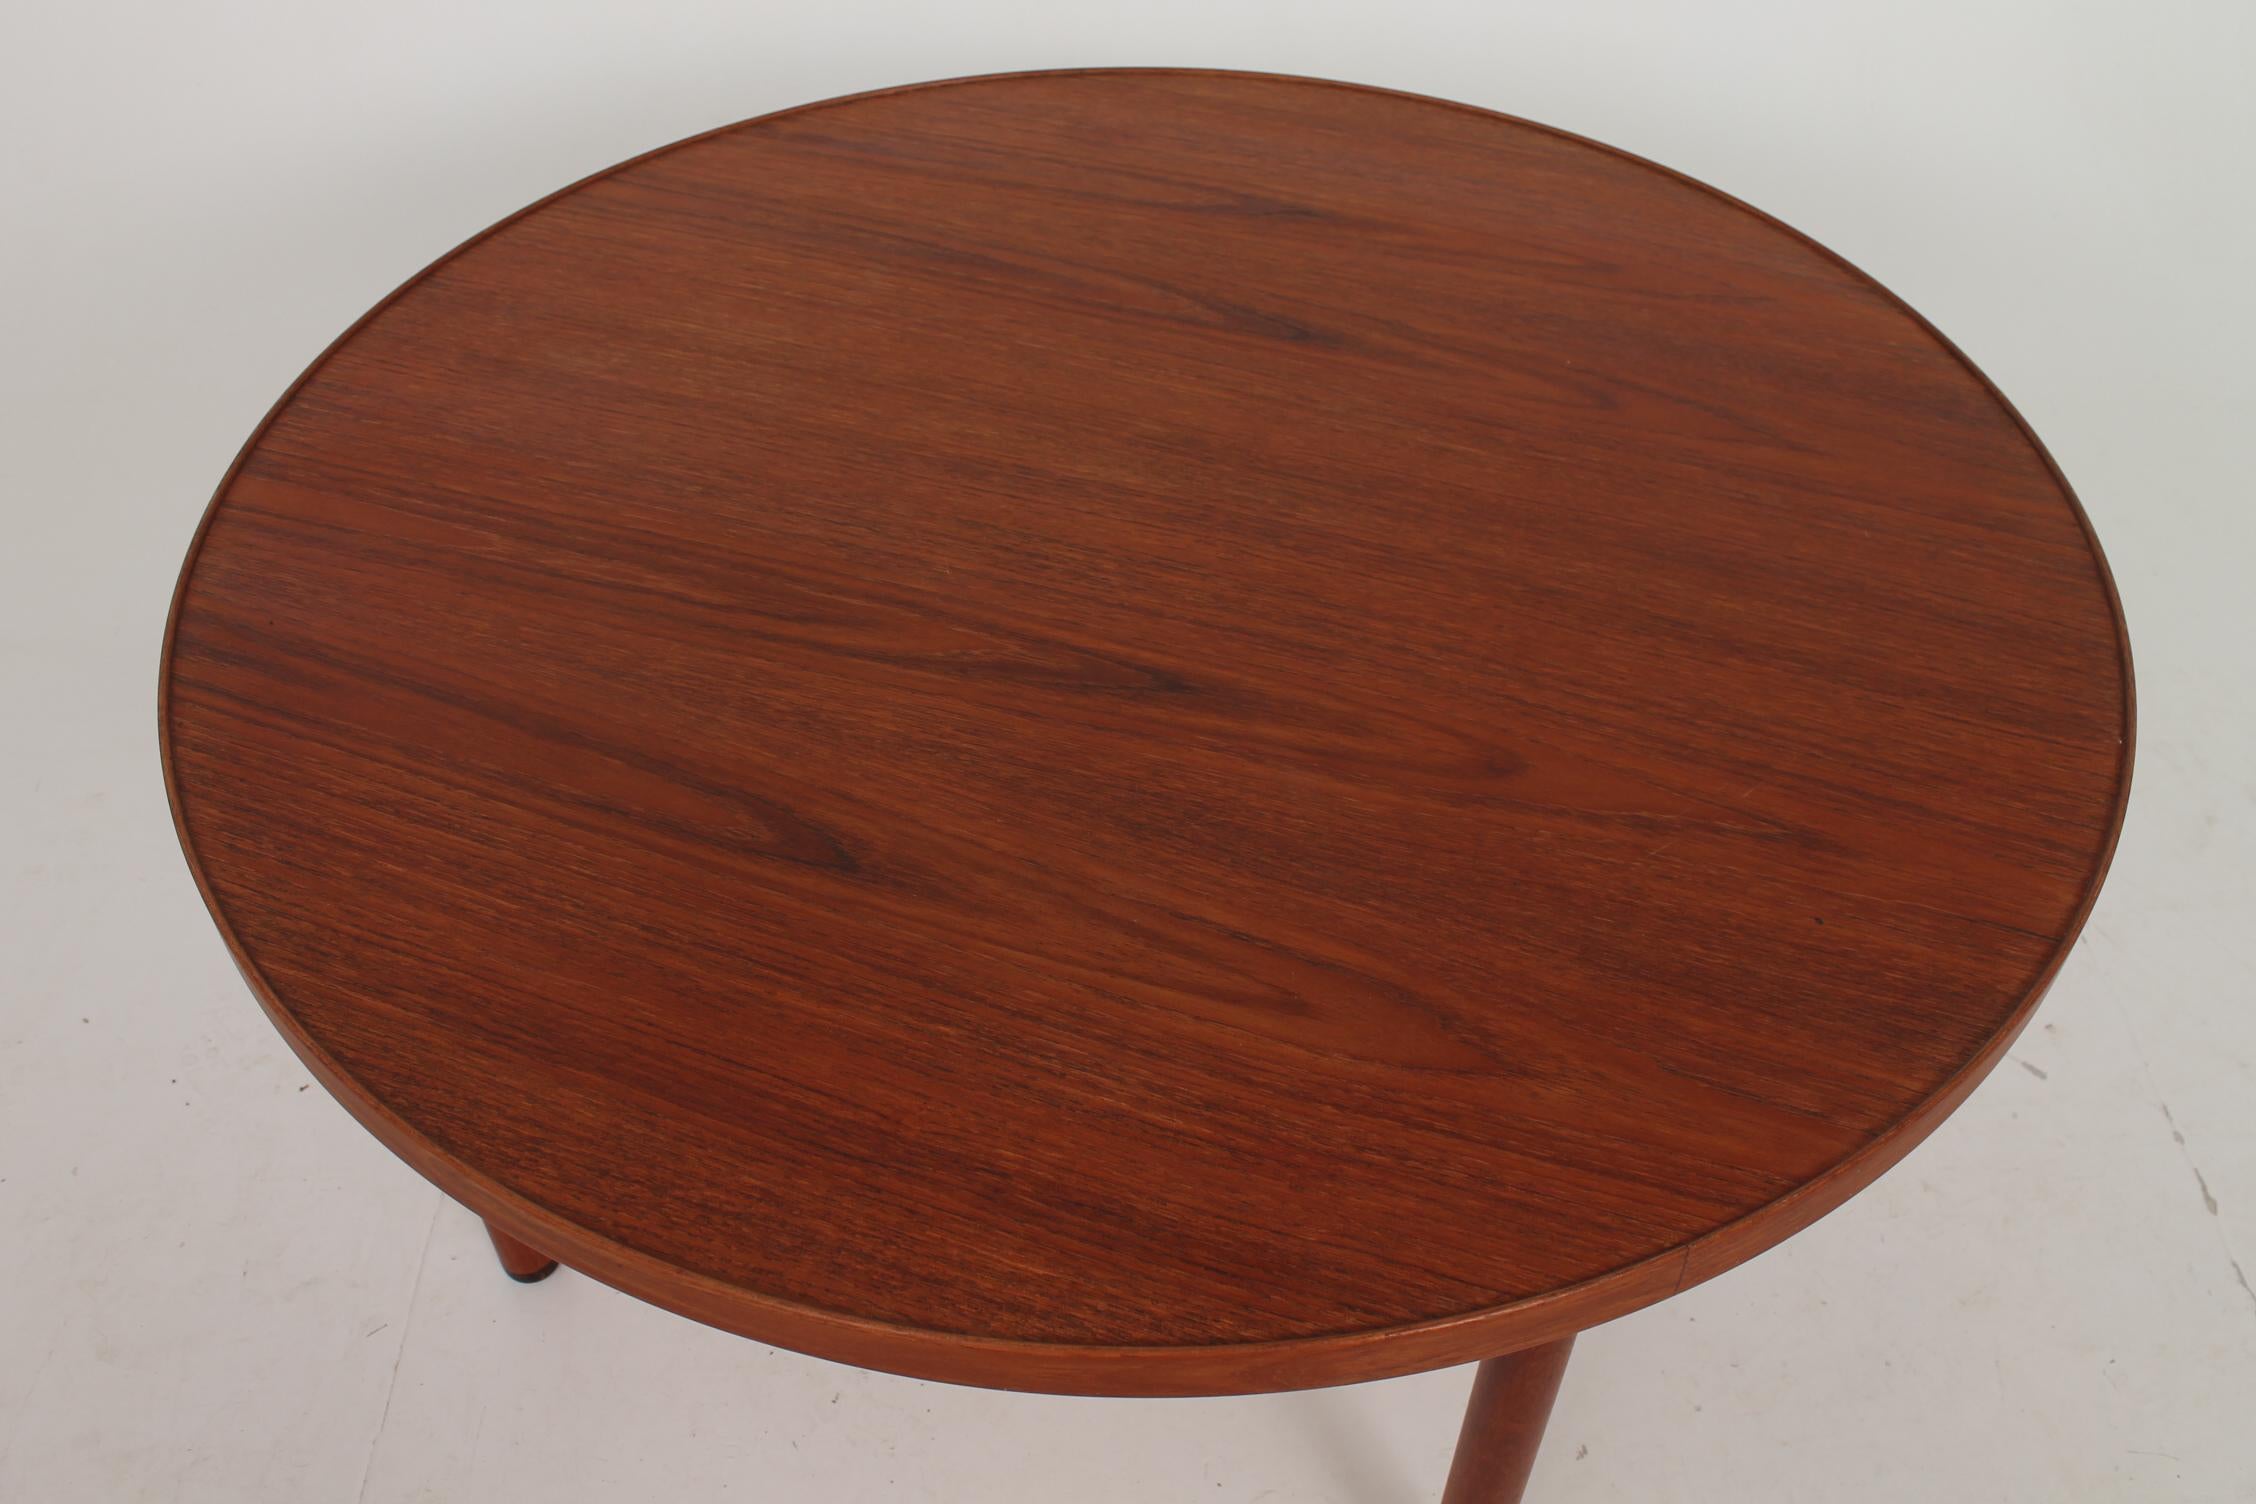 Round coffee table in teak with wengé shoes. Table top with a subtile edge as an outline. Stamped and manufactured by Næstved Møbelfabrik in the mid 1950s. Iconic design by Ejnar Larsen and Aksel Bender Madsen, Denmark. Condition is beautiful,